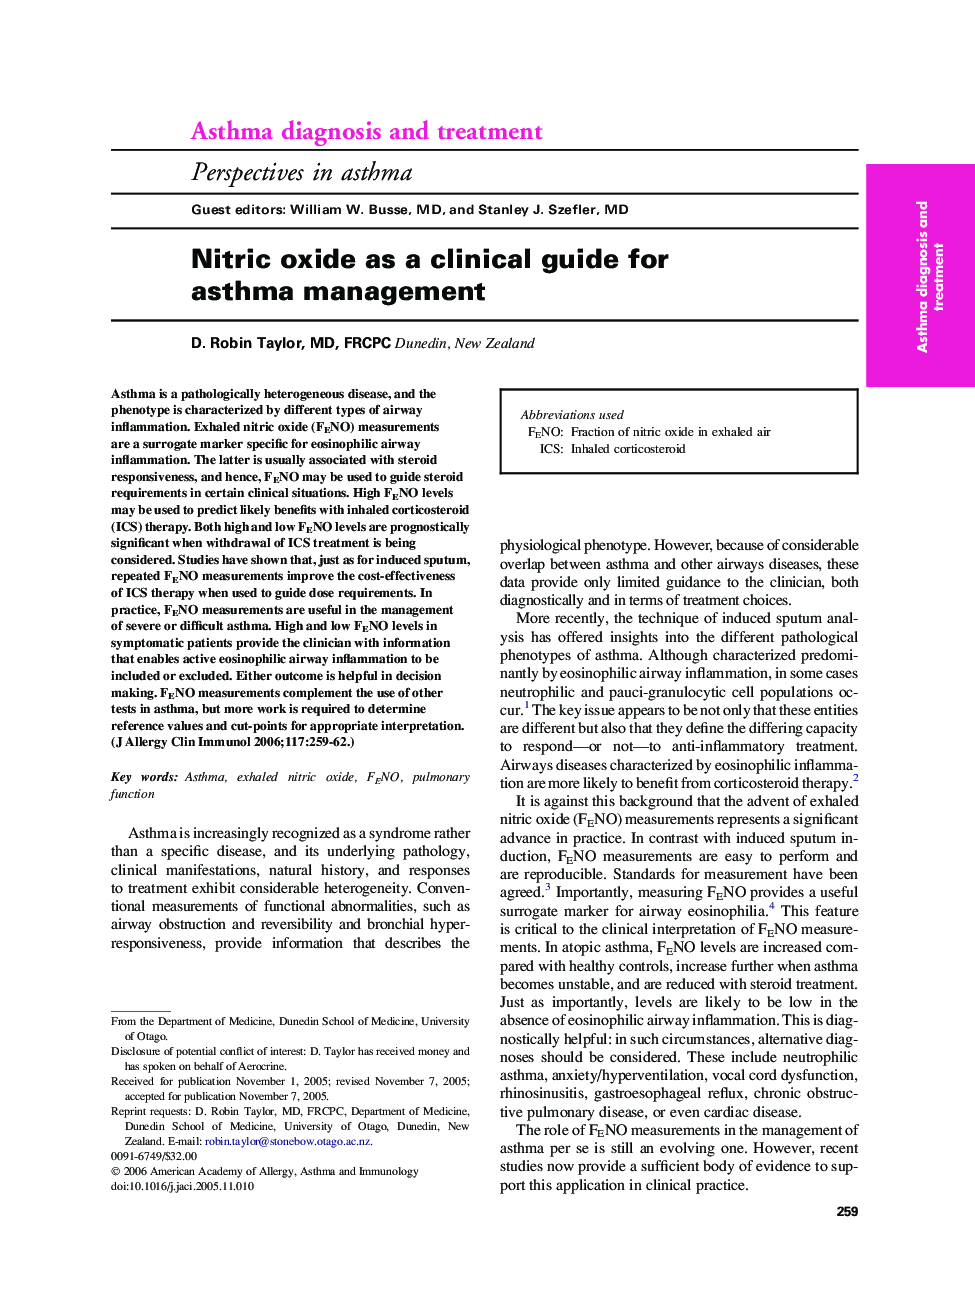 Nitric oxide as a clinical guide for asthma management 